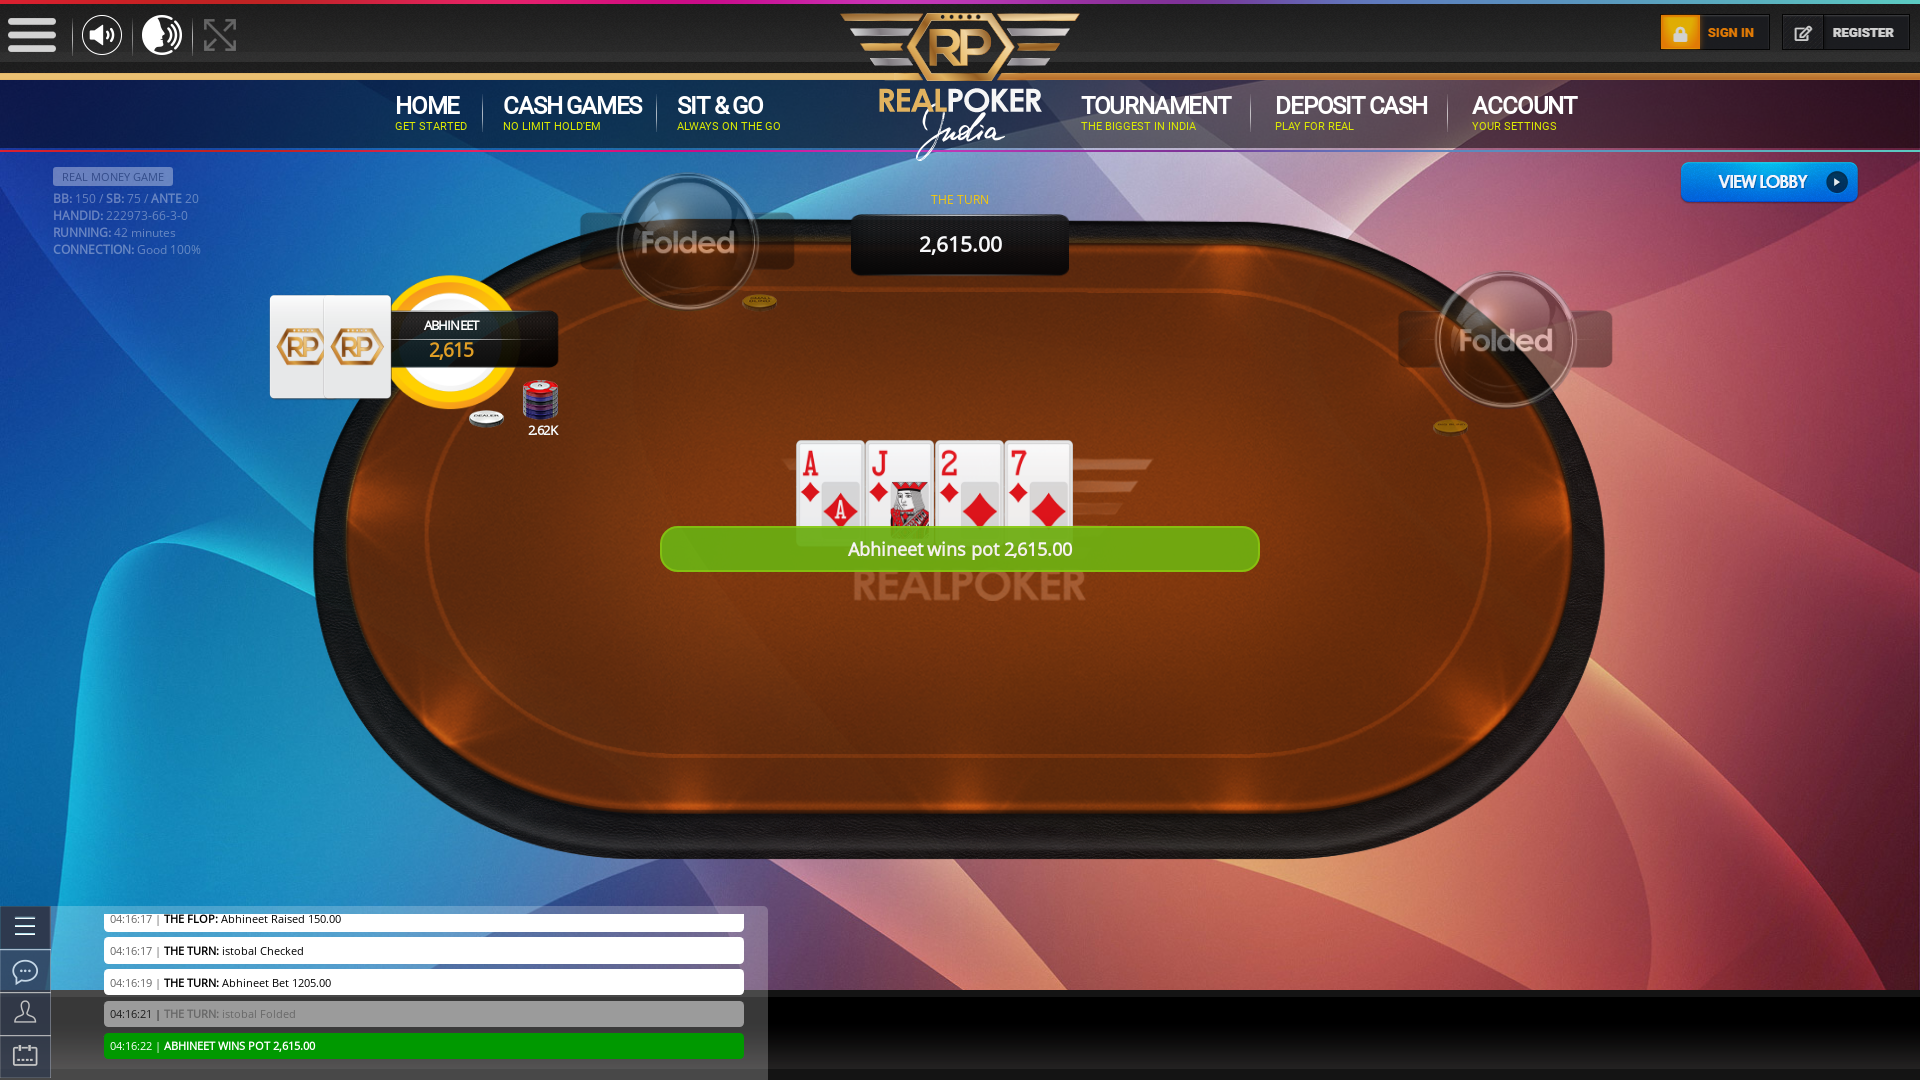 Real Indian poker on a 10 player table in the 42nd minute of the game